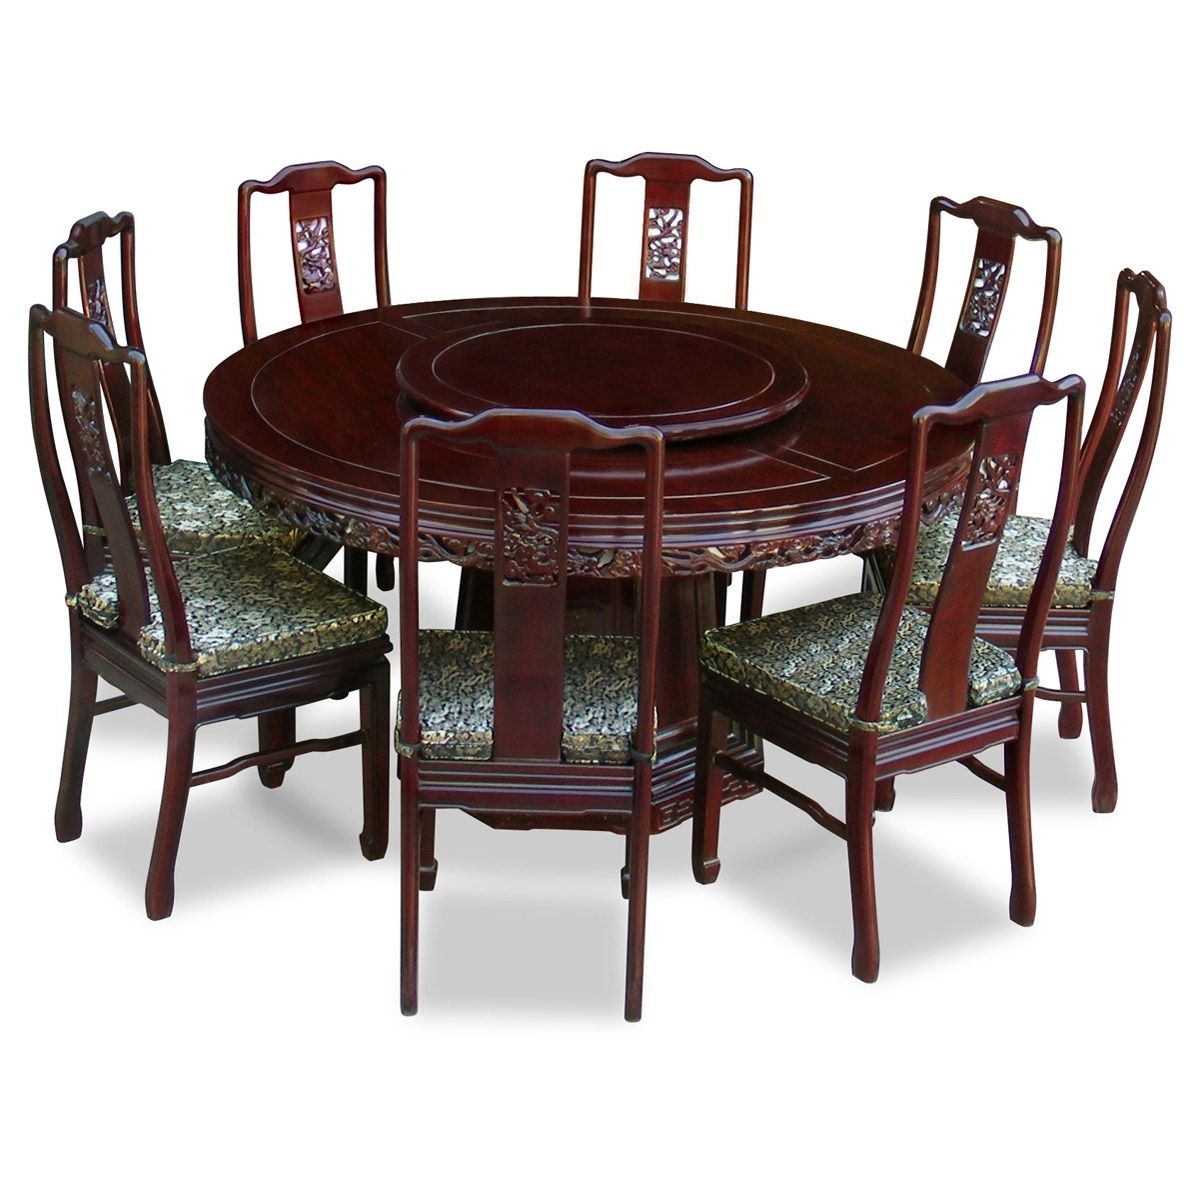 Fabulous Round Dining Table For 8 Ideas Decofurnish Rolling Dining Inside Most Popular 8 Seater Round Dining Table And Chairs (Photo 14 of 25)